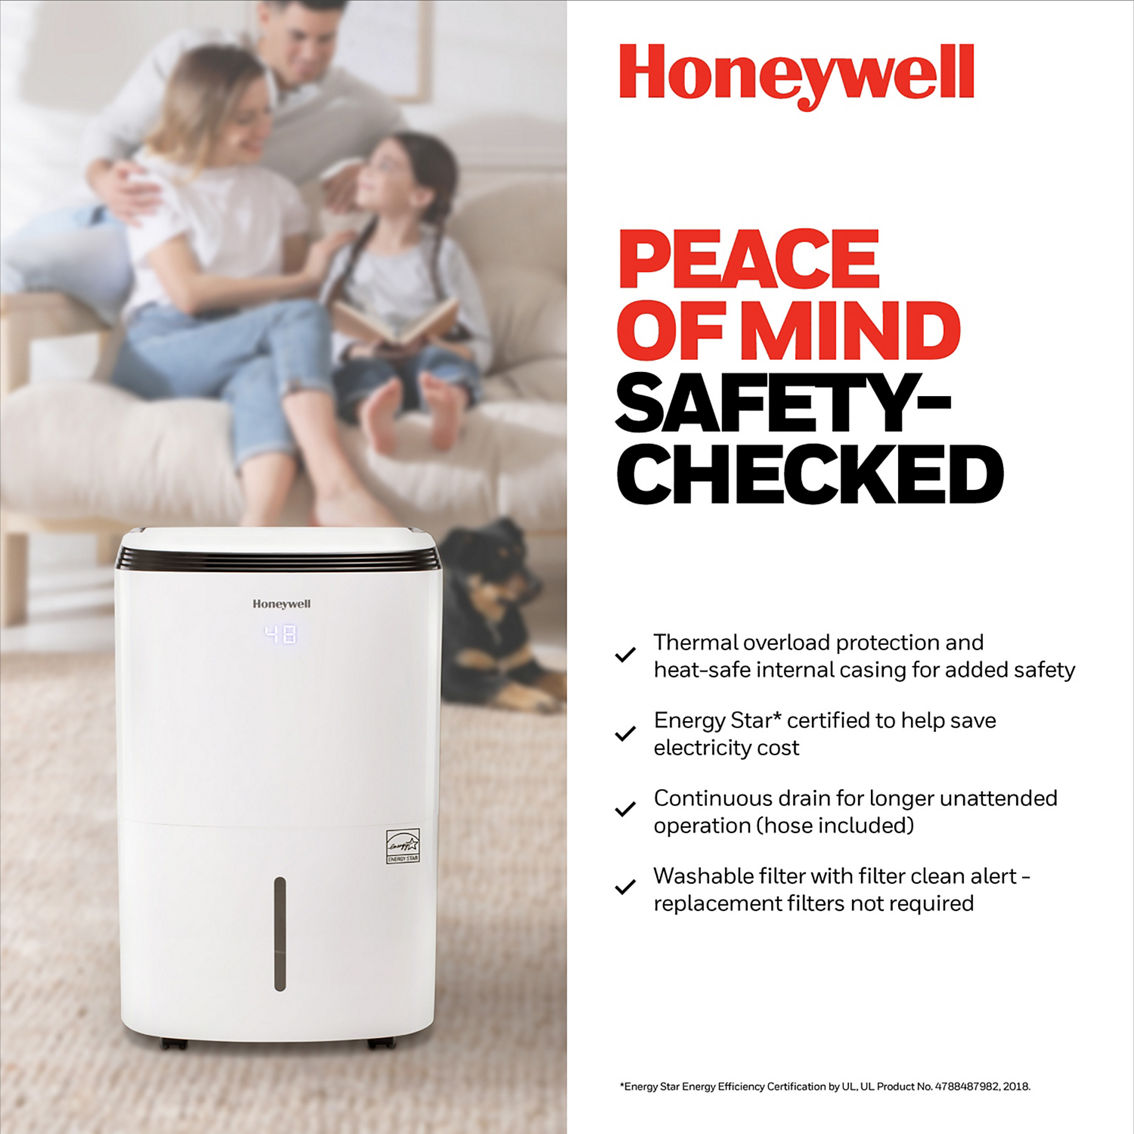 Honeywell 30 Pint Energy Star Dehumidifier with Washable Filter - Image 5 of 6